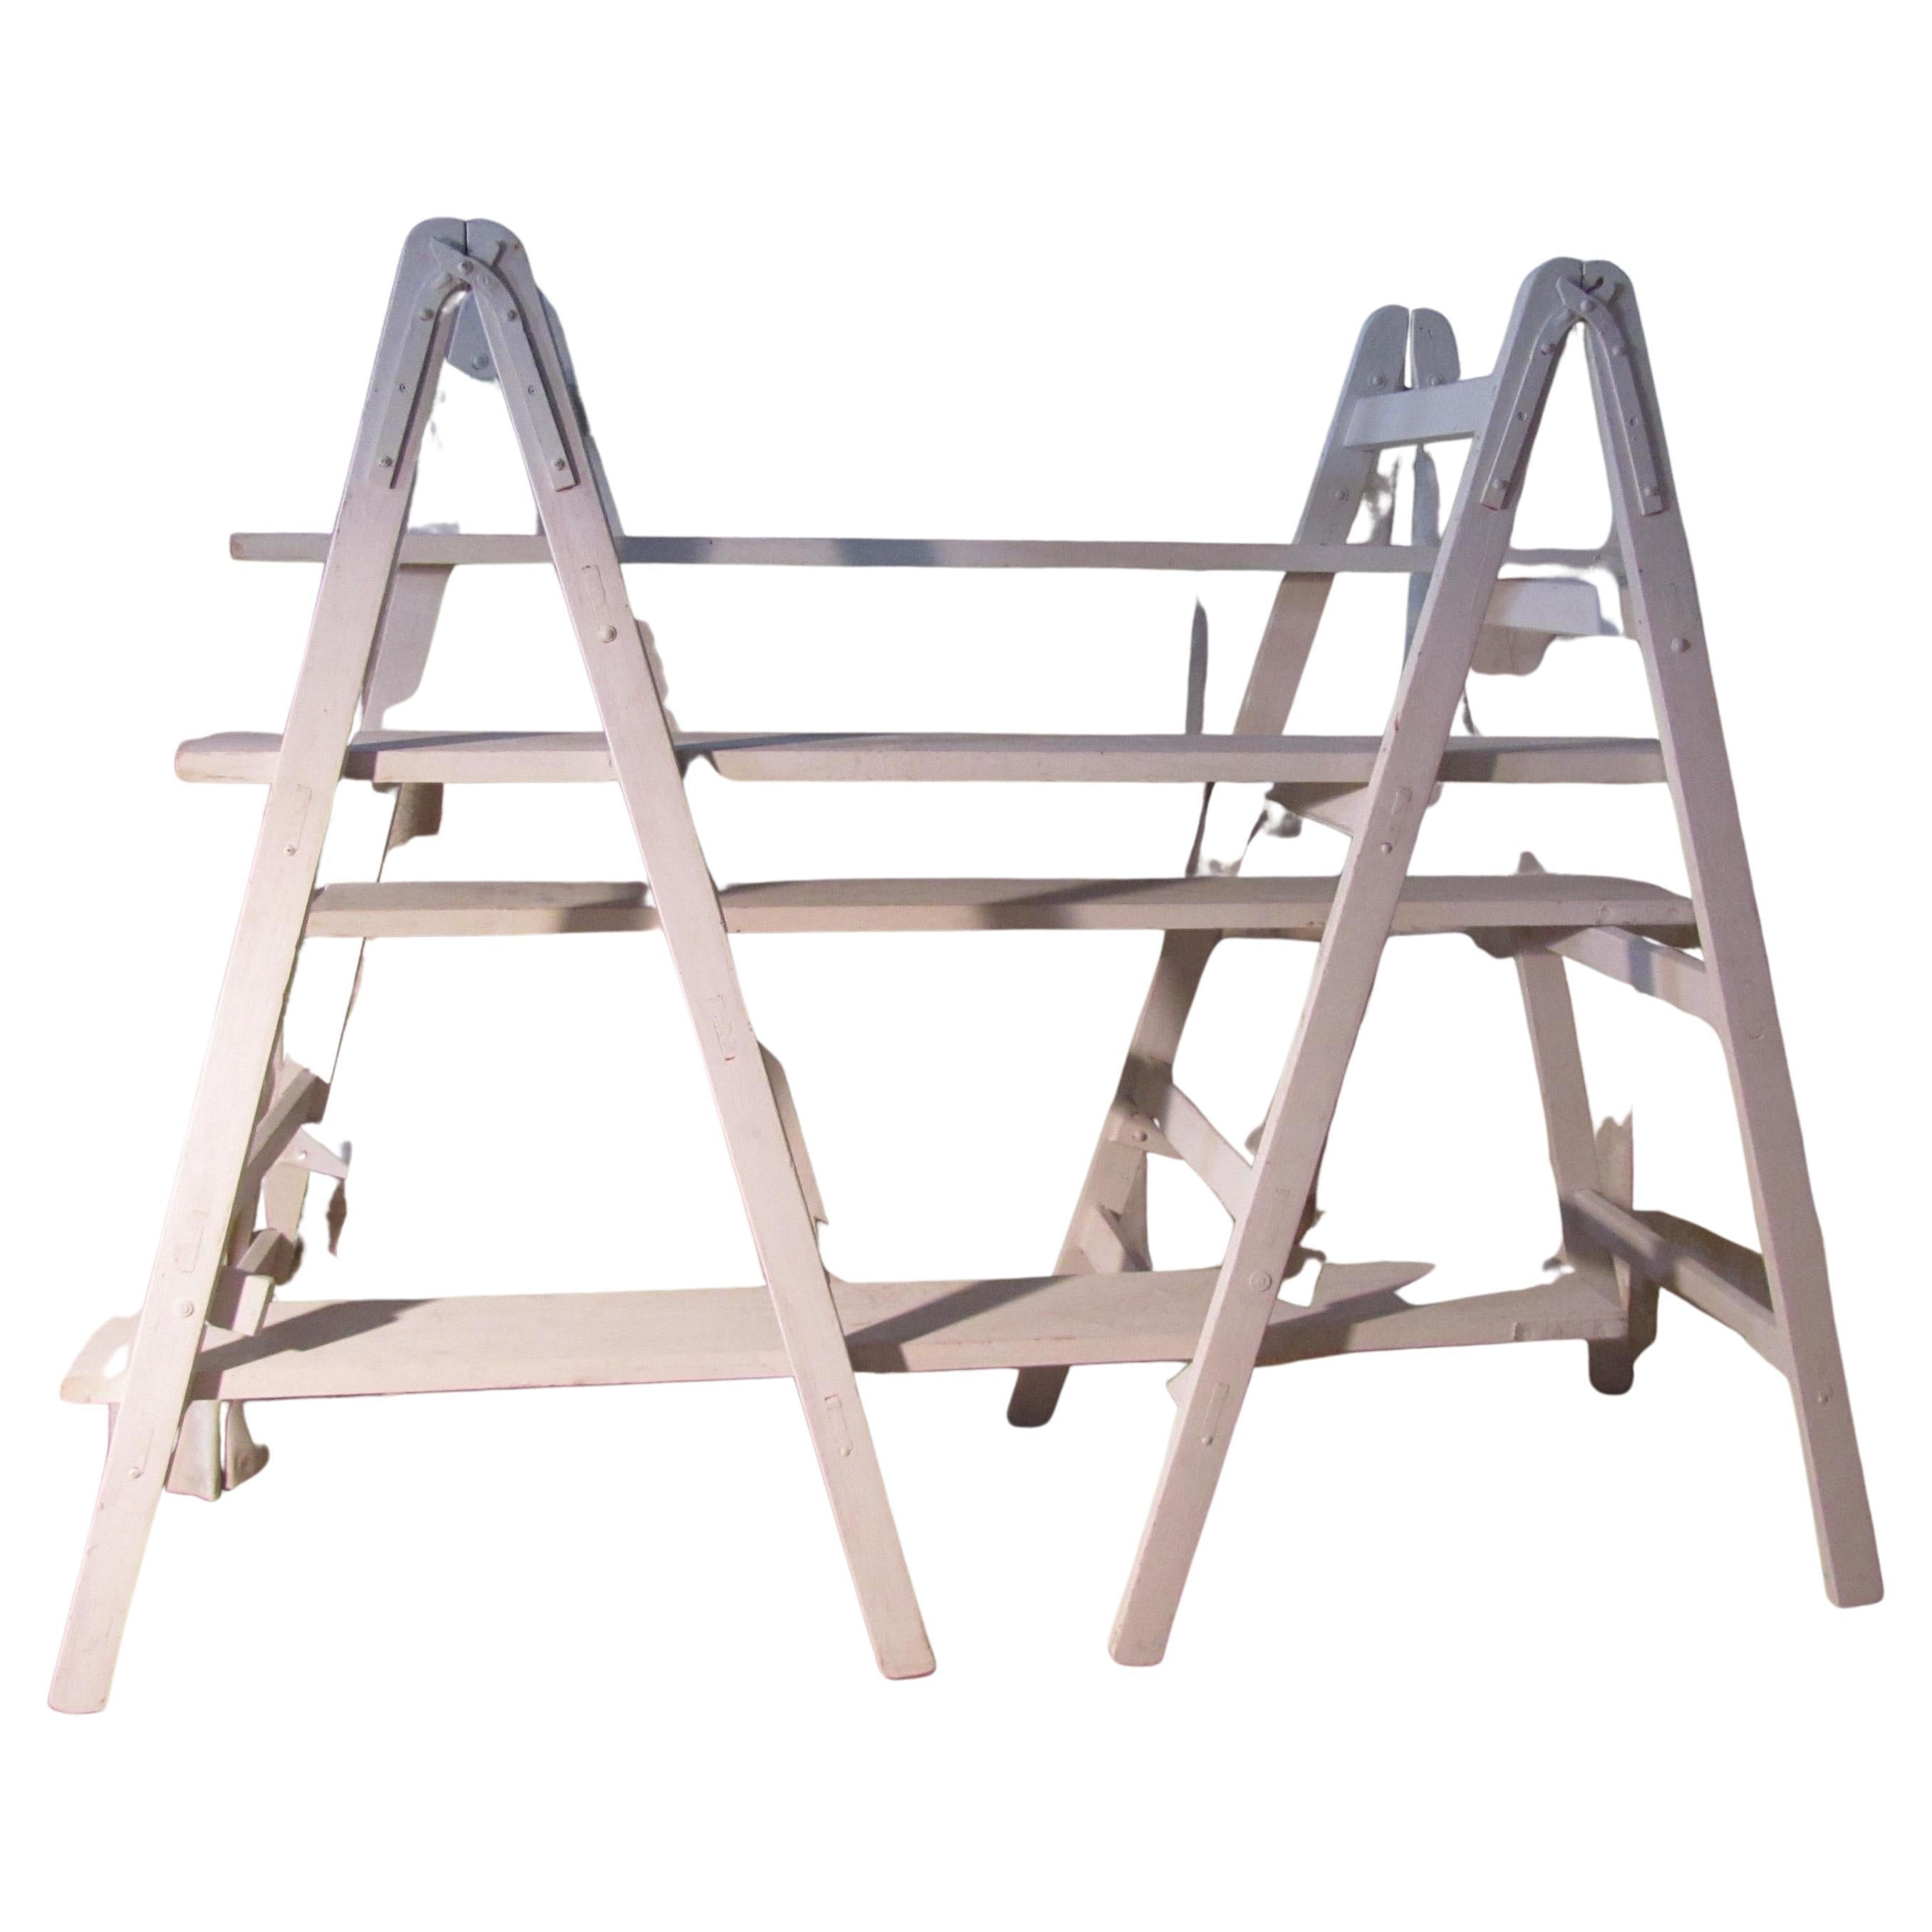 6ft Tall Shabby Painted Pair of Builder’s Trestles     